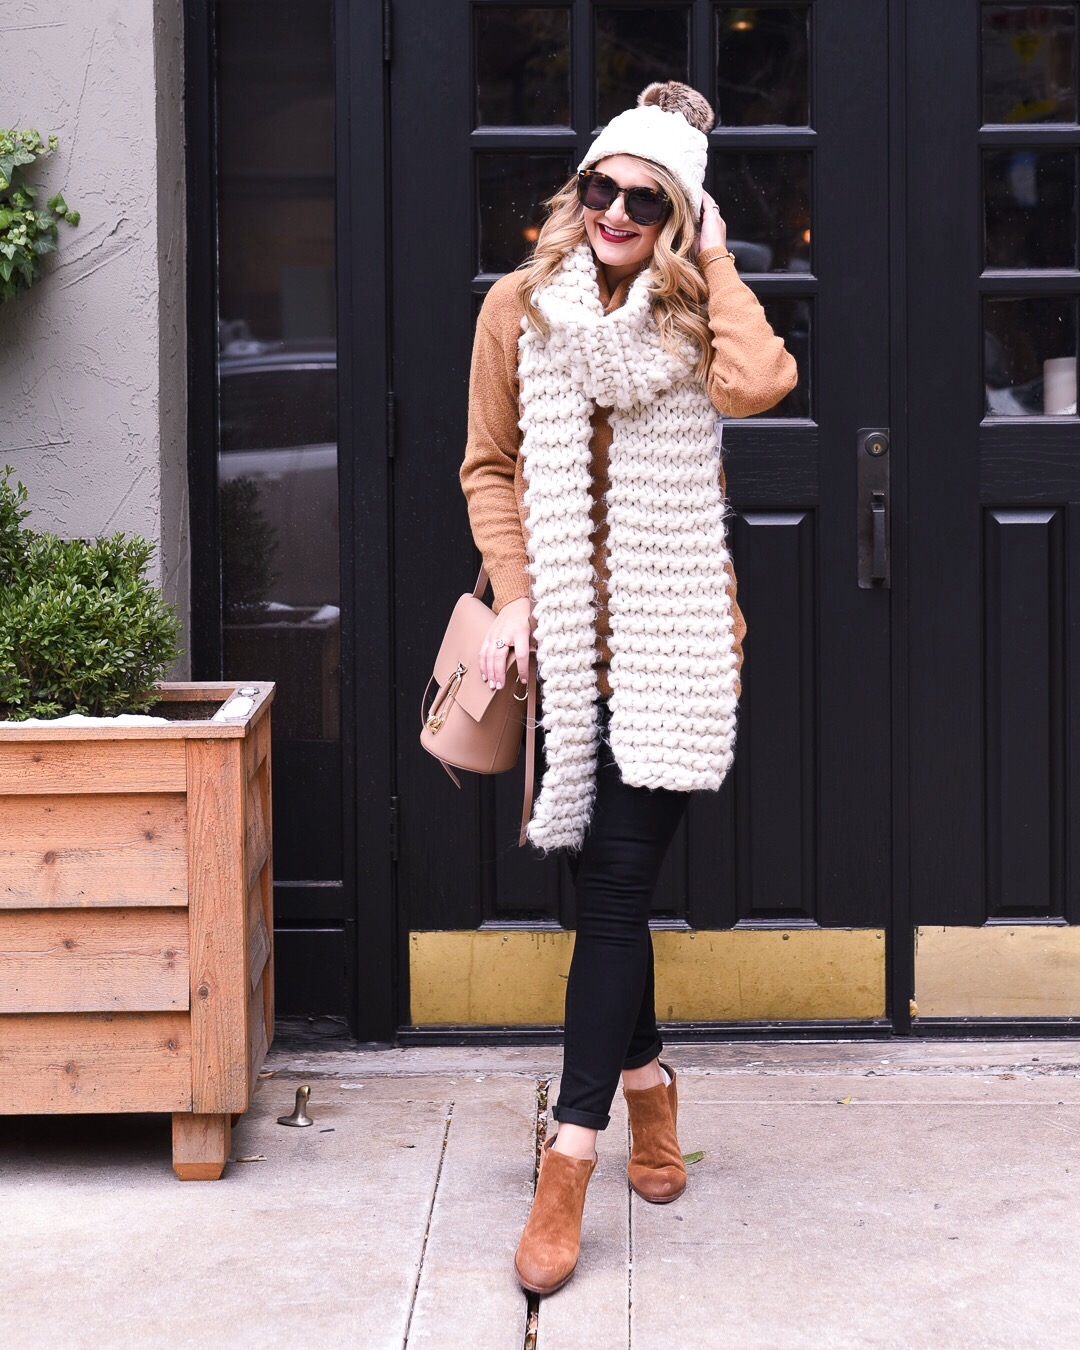 Friday Five: 5 Must Have Items to Survive Winter by Chicago fashion blogger Visions of Vogue